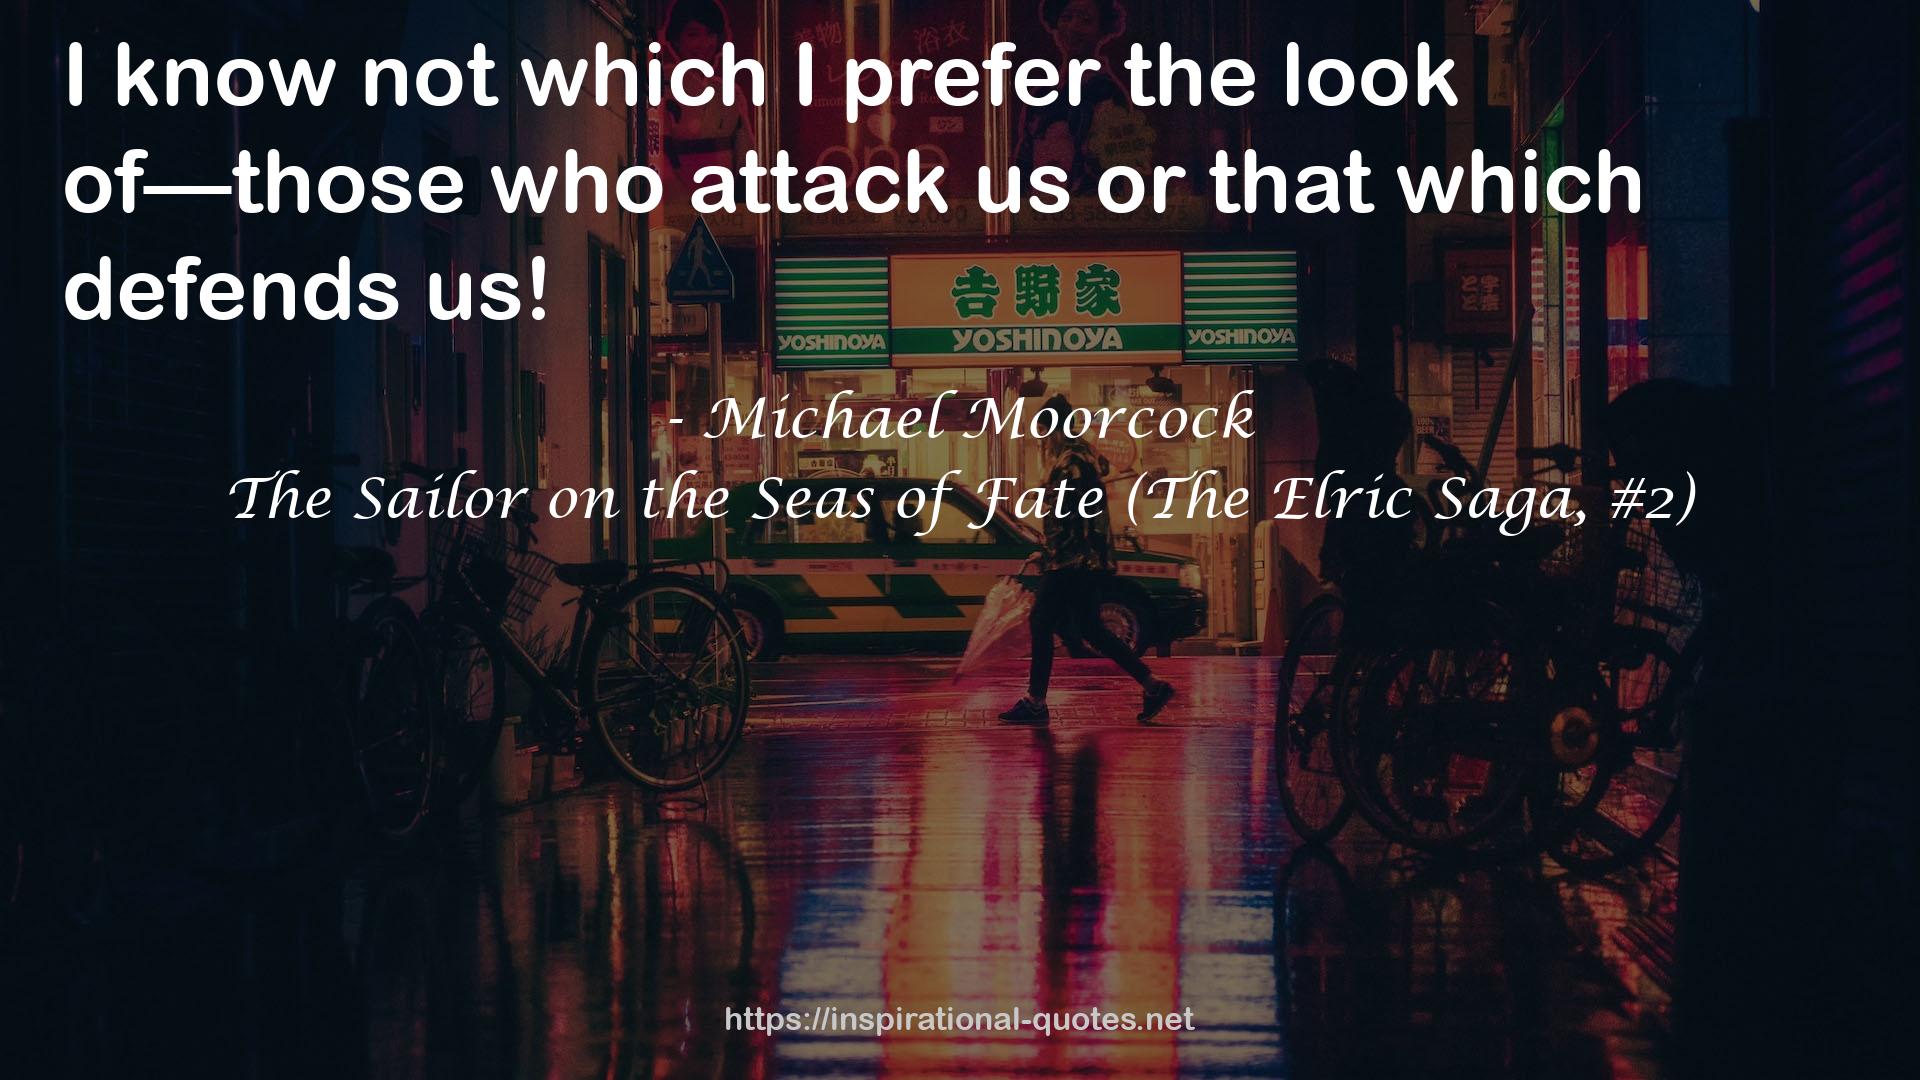 The Sailor on the Seas of Fate (The Elric Saga, #2) QUOTES